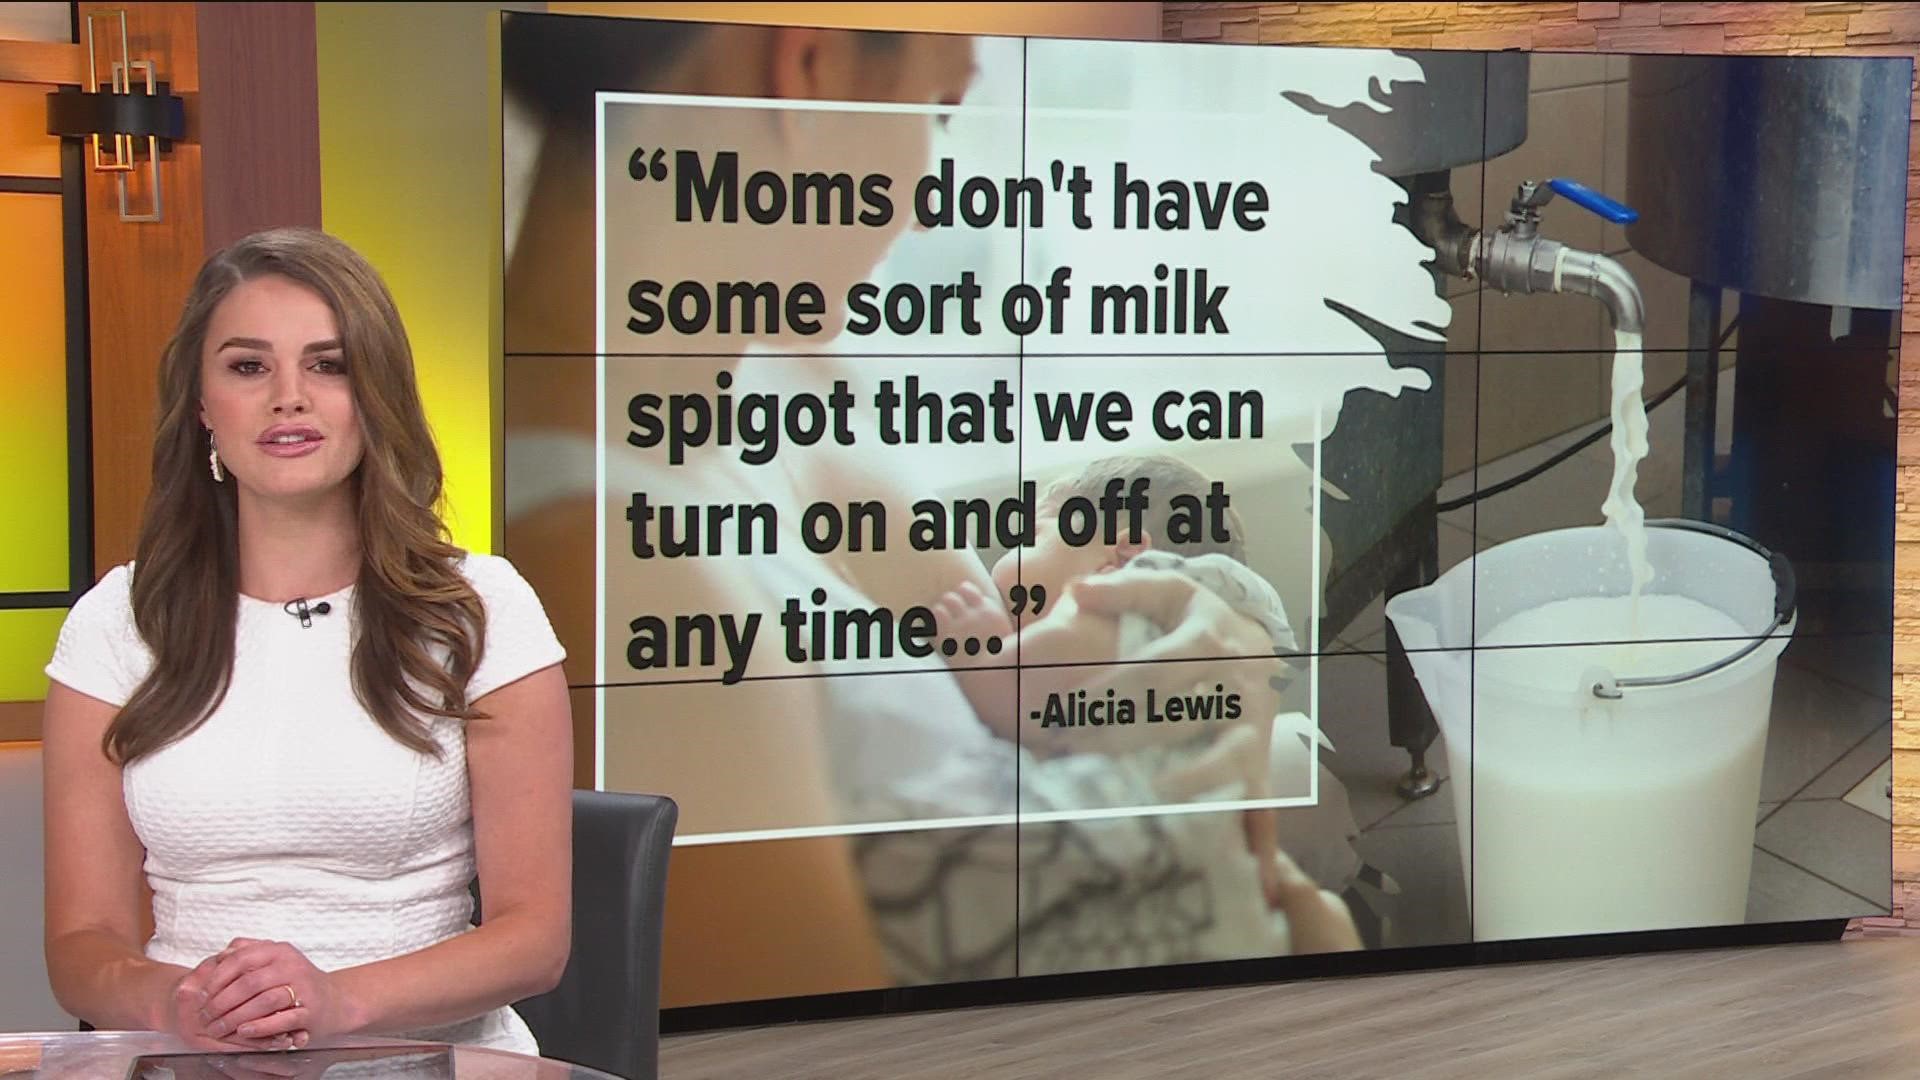 Recent social media posts about the baby formula have prompted KARE 11's Alicia Lewis to say speak up about motherhood.